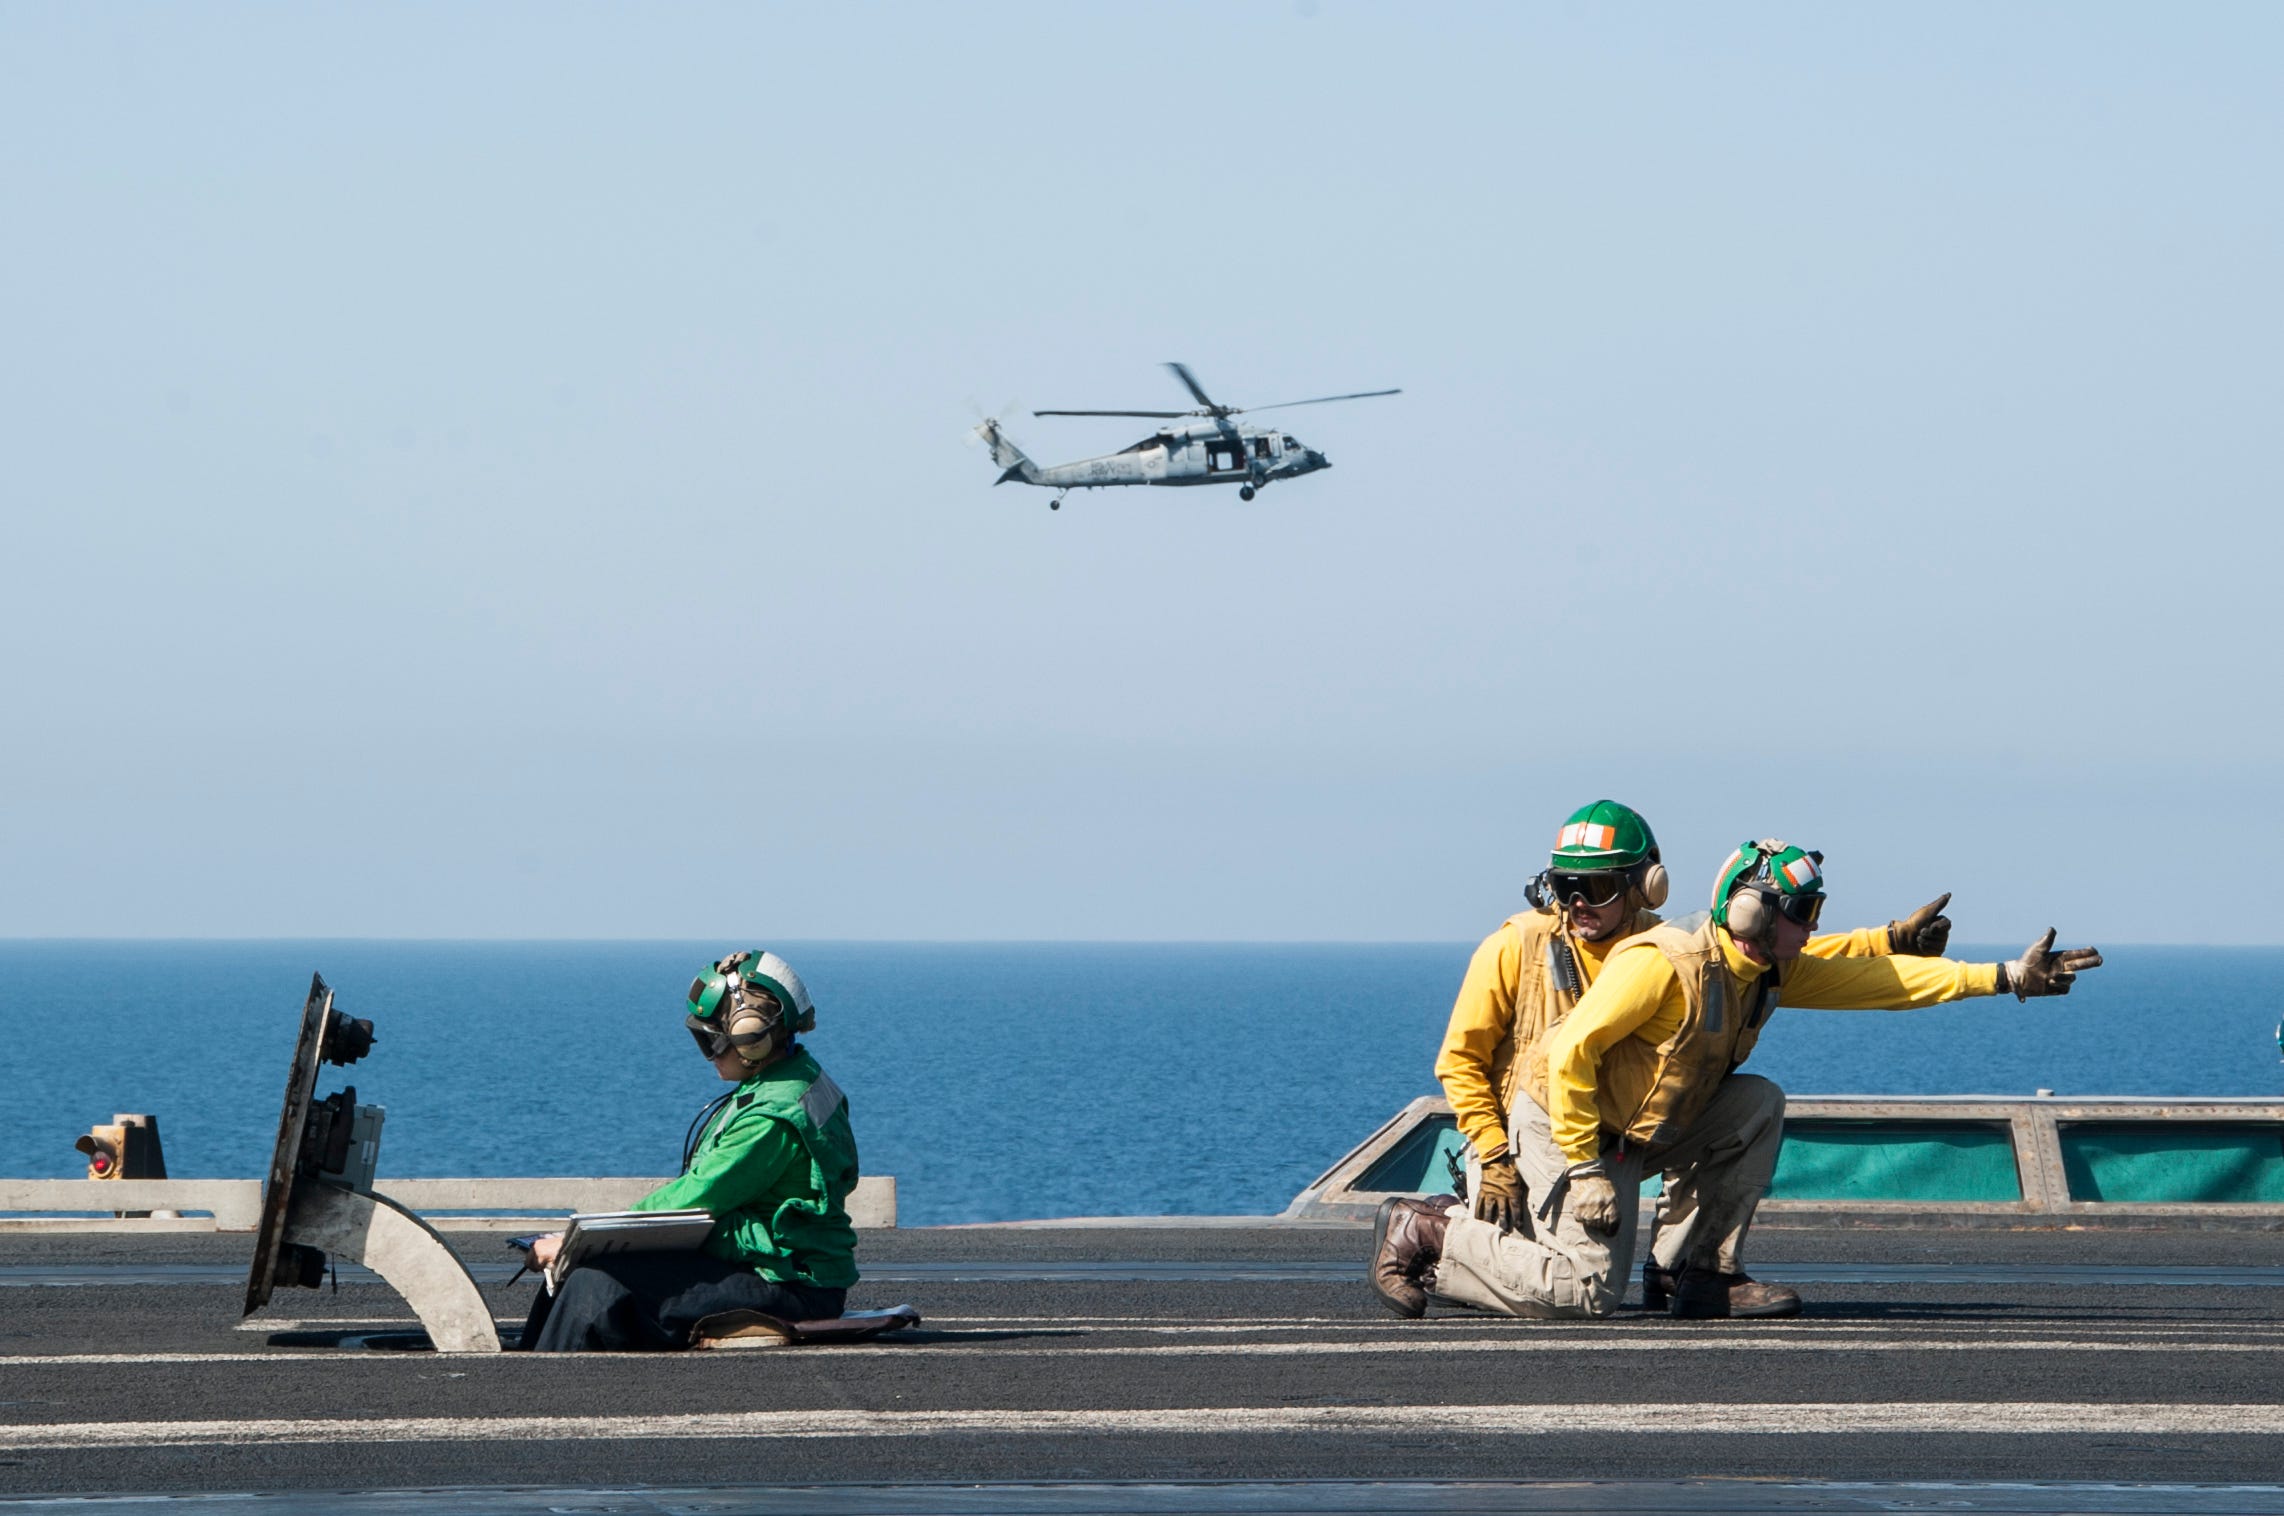 U.S. Sailors launch aircraft on the flight deck of the aircraft carrier USS George H.W. Bush (CVN 77) Oct. 10, 2014, in the Persian Gulf. The ship supported maritime security operations, strike operations in Iraq and Syria as directed, and theater security cooperation efforts in the U.S. 5th Fleet area of responsibility. President Barack Obama authorized humanitarian aid deliveries to Iraq as well as targeted airstrikes to protect U.S. personnel from extremists known as the Islamic State in Iraq and the Levant. U.S. Central Command directed the operations. (U.S. Navy photo by Mass Communication Specialist 3rd Class Brian Stephens/Released)